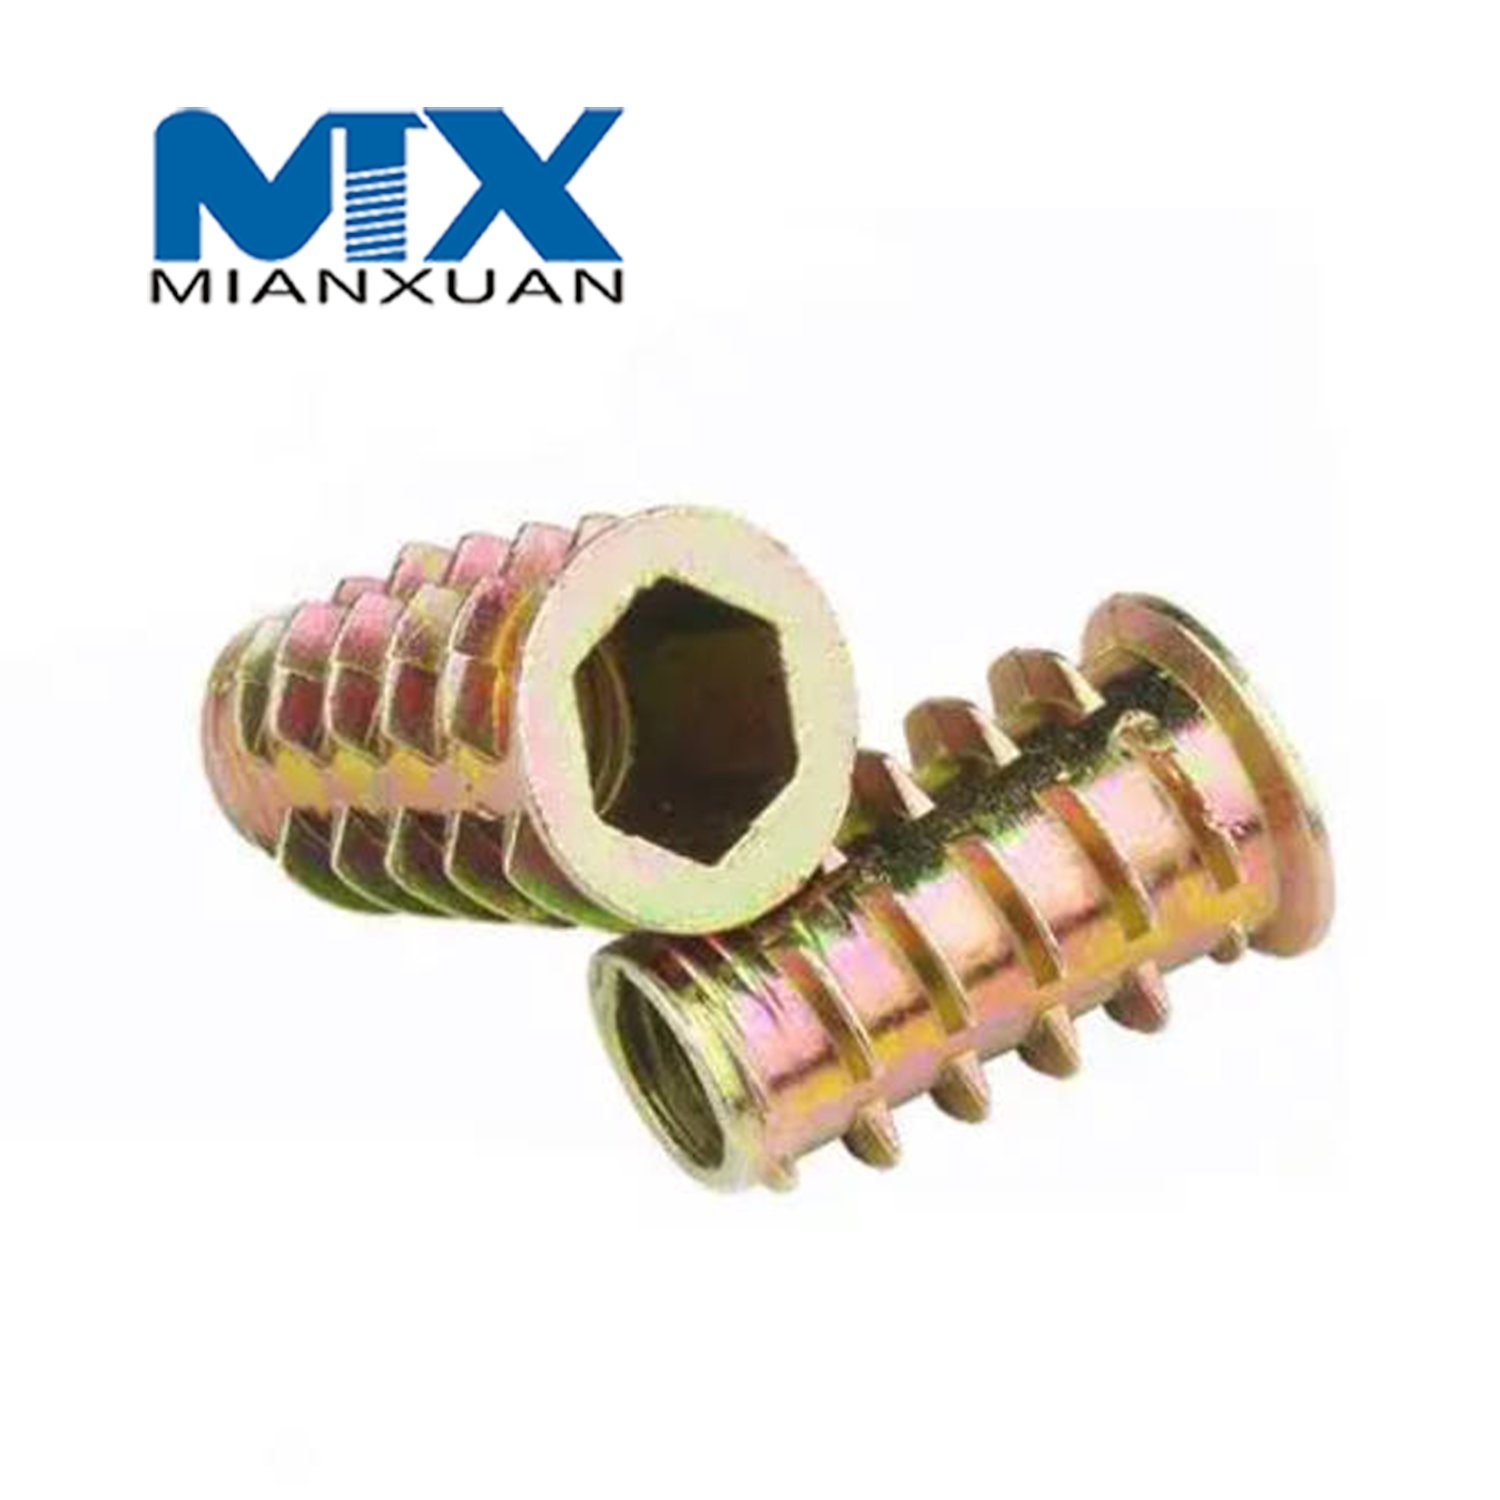 Zinc Alloy for Wood Insert Nut Flanged Hex Drive Head Furniture Nuts